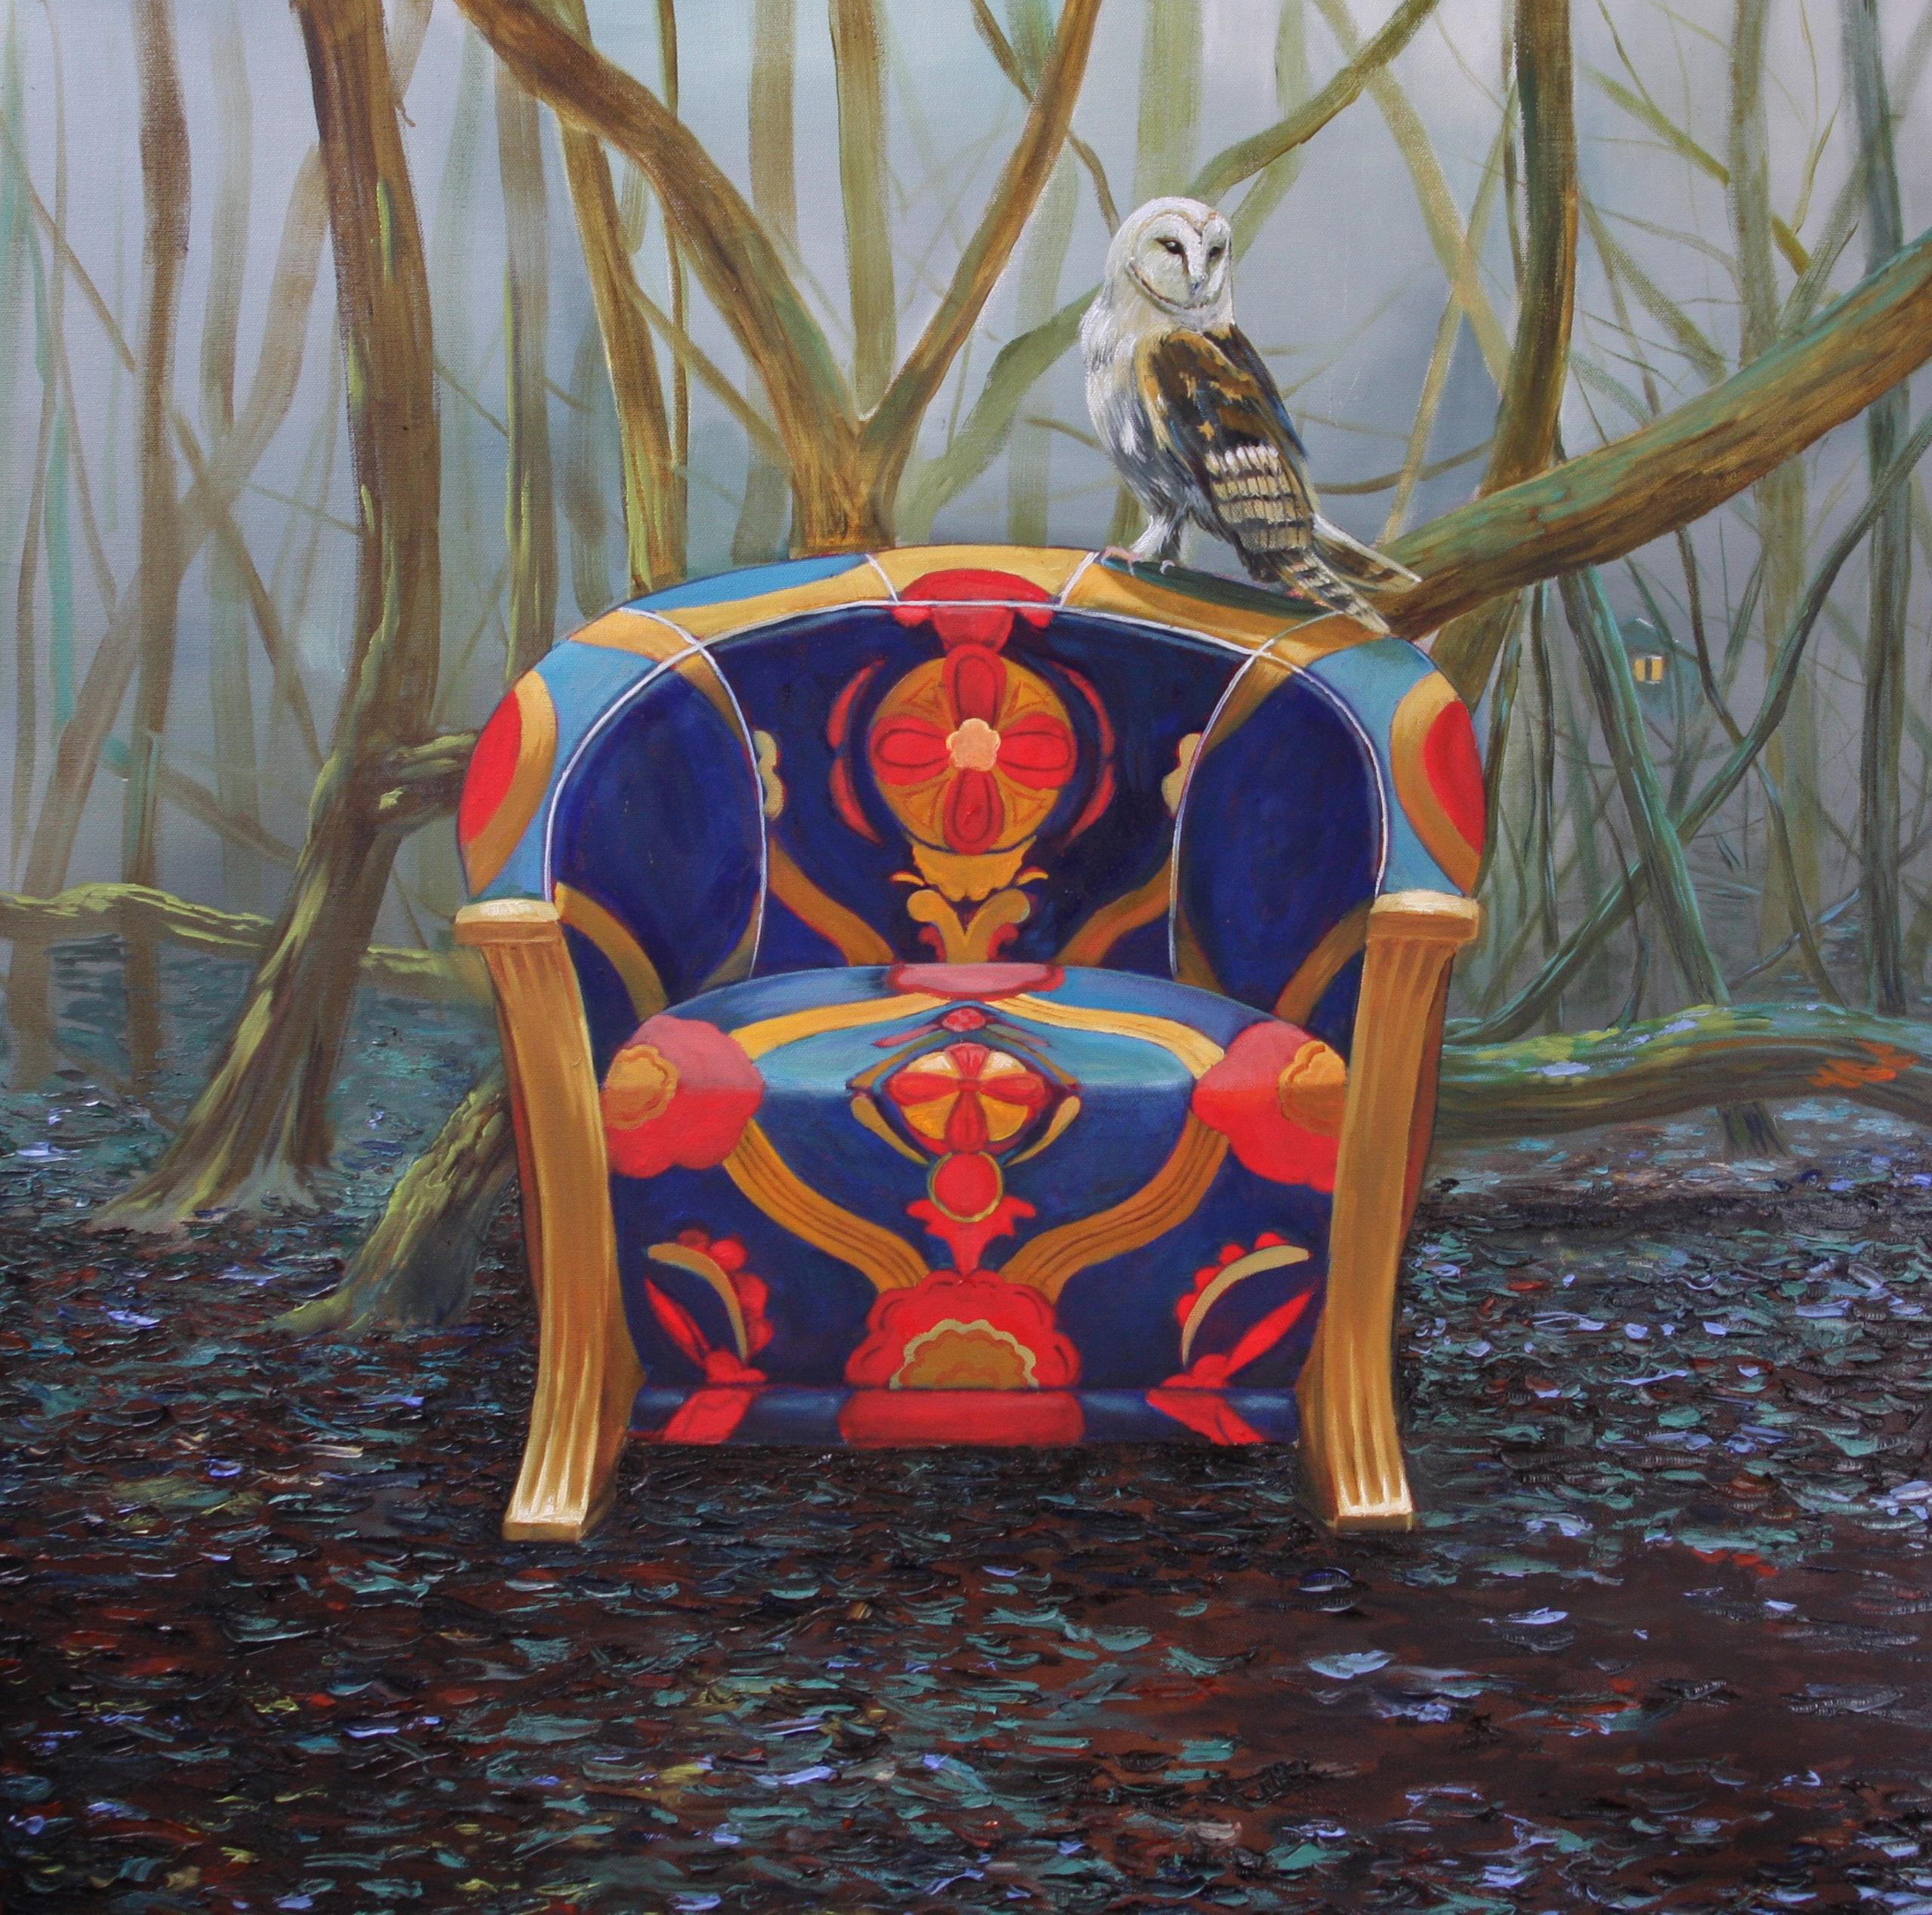 Winter Chair is part of Llael's seasonal chair series. The series features different chairs in natural settings, with each season reflected in the background. A misty morning contrasts the rich colours of the chair. Piece is oil on fine